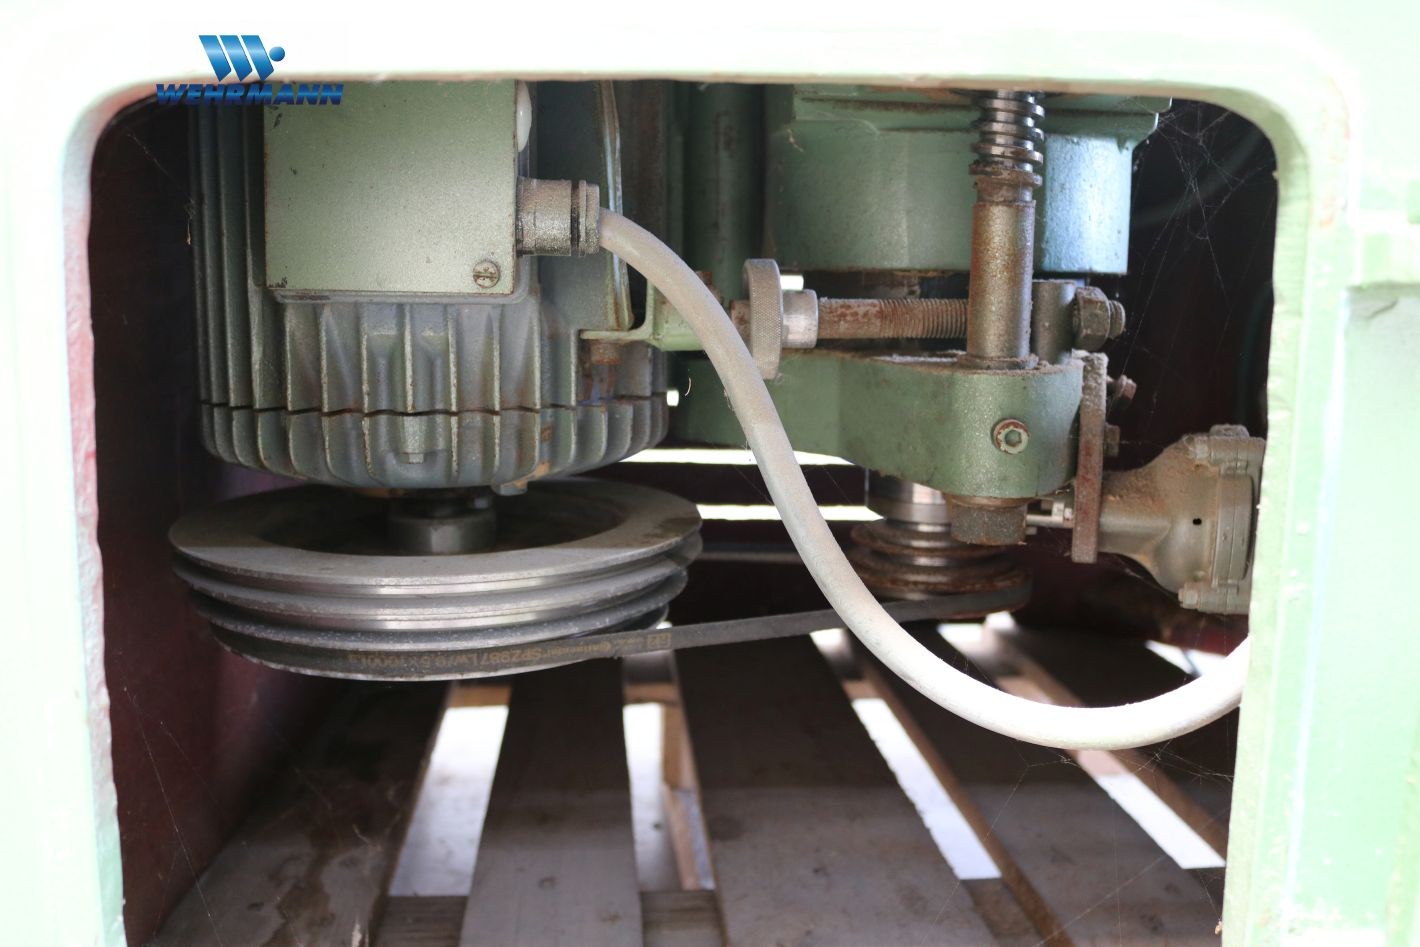 Spindle milling machine /  / 